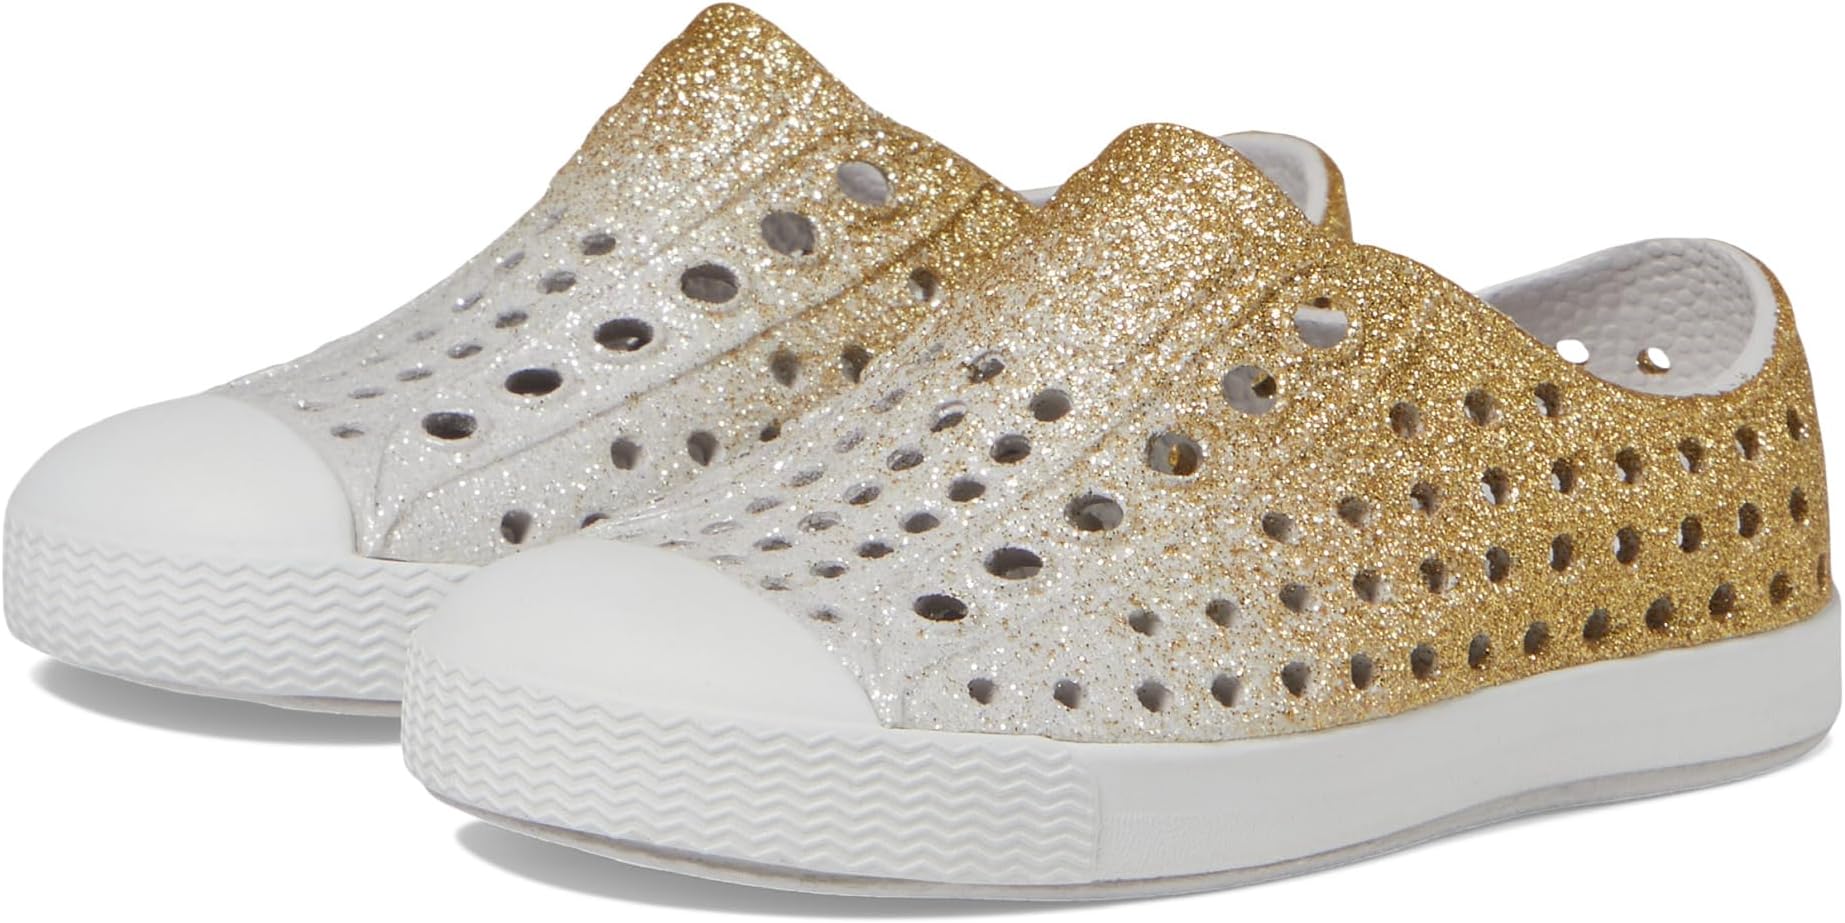 girls ballet flats baby dance party girls shoes glitter children shoes gold bling princess shoes 3 12 years kids shoes mch026 Кроссовки Jefferson Bling Native Shoes Kids, цвет Gold Frost Bling/Shell White